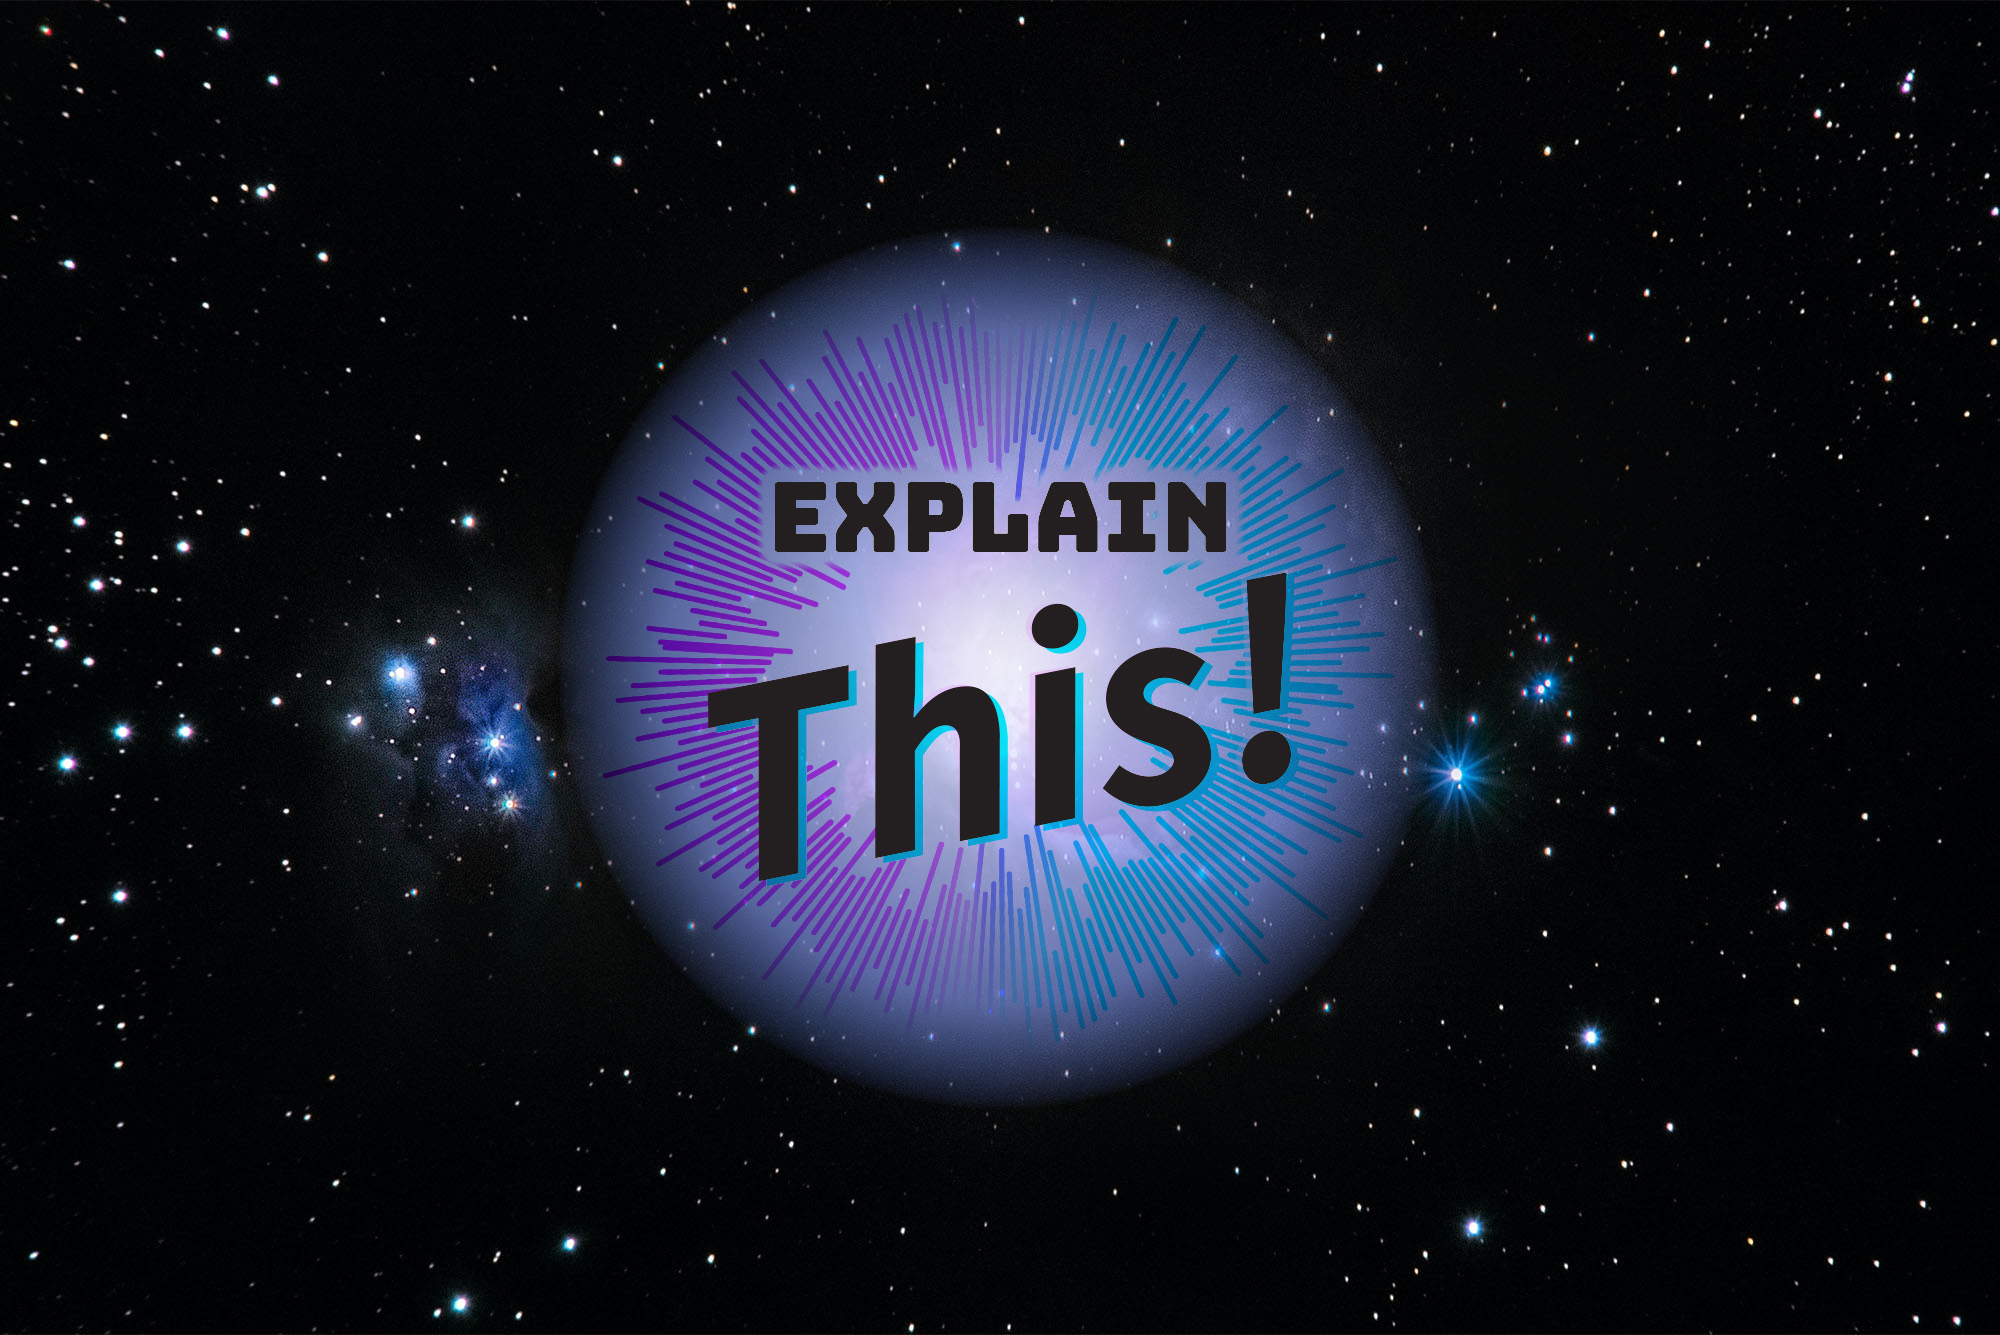 Photo of deep space with galaxies and stars visible. Text overlay in blue and black reads "Explain This!"